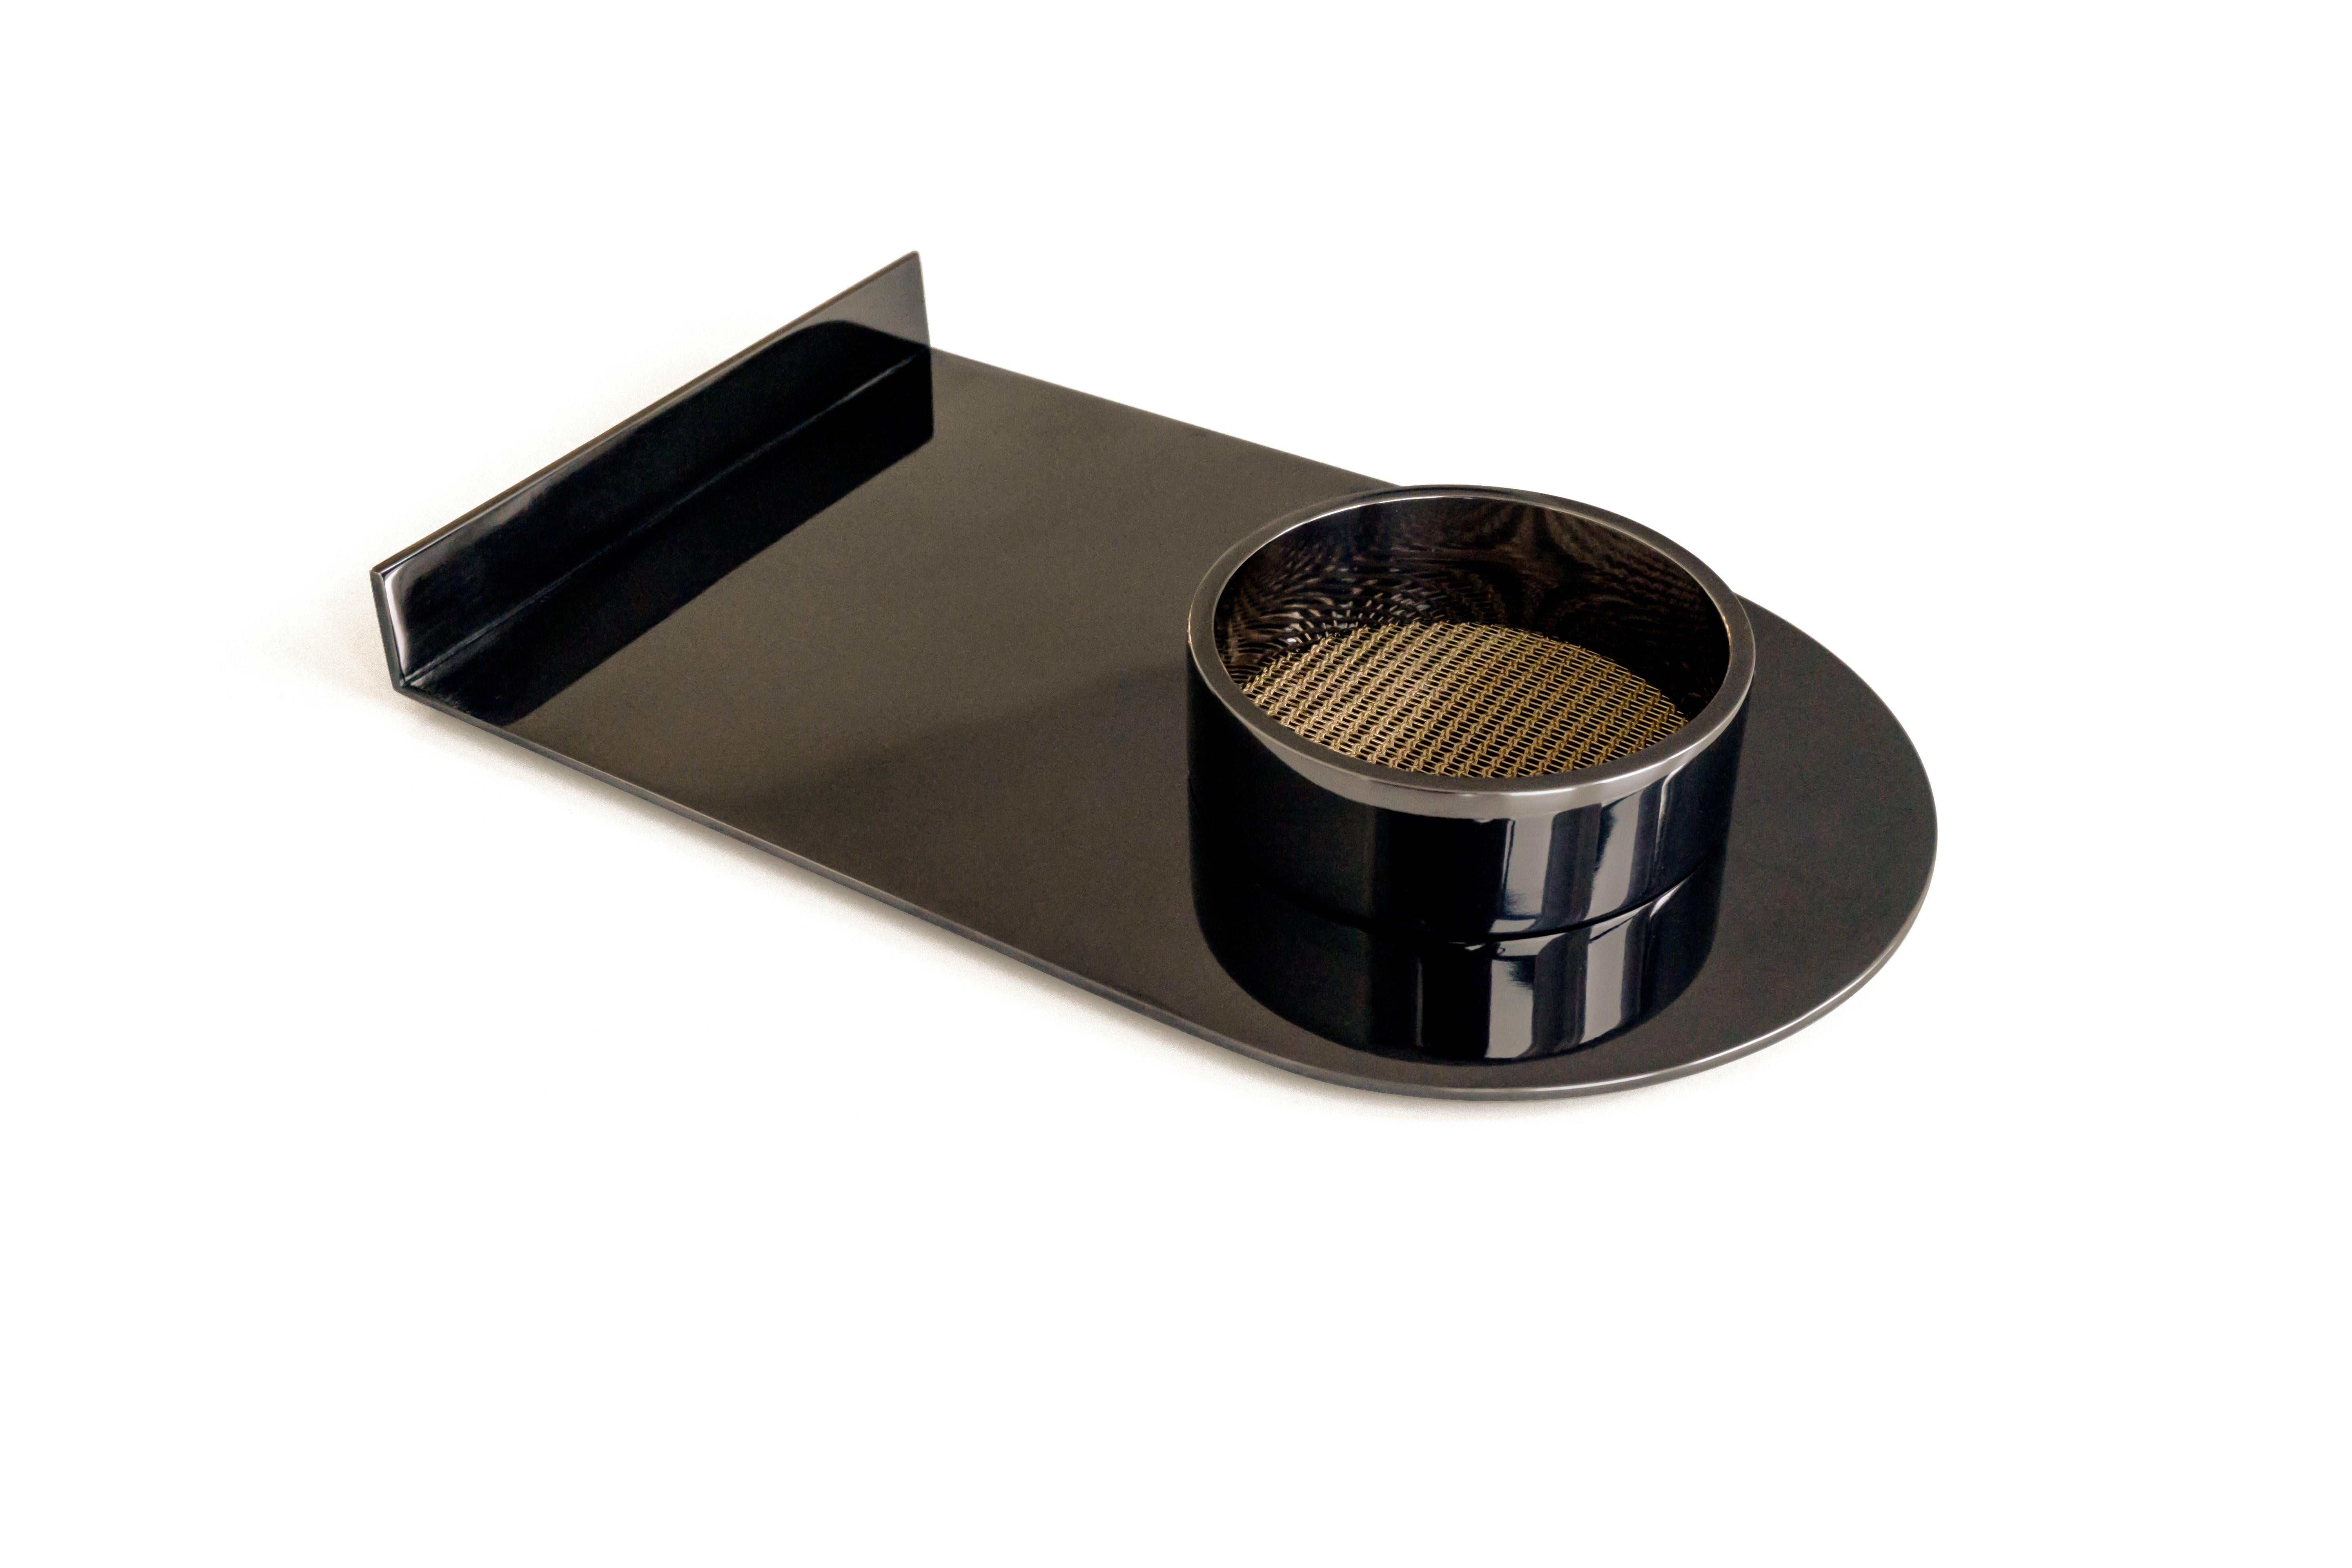 ZERO valet tray in a black polished Nickel with a bronze mesh insert to catch the finest of jewels, keys or special trinkets. The valet tray is the perfect fit for a foyer, desk, vanity or a decorative accessory/object

Designed by OA 

Also,